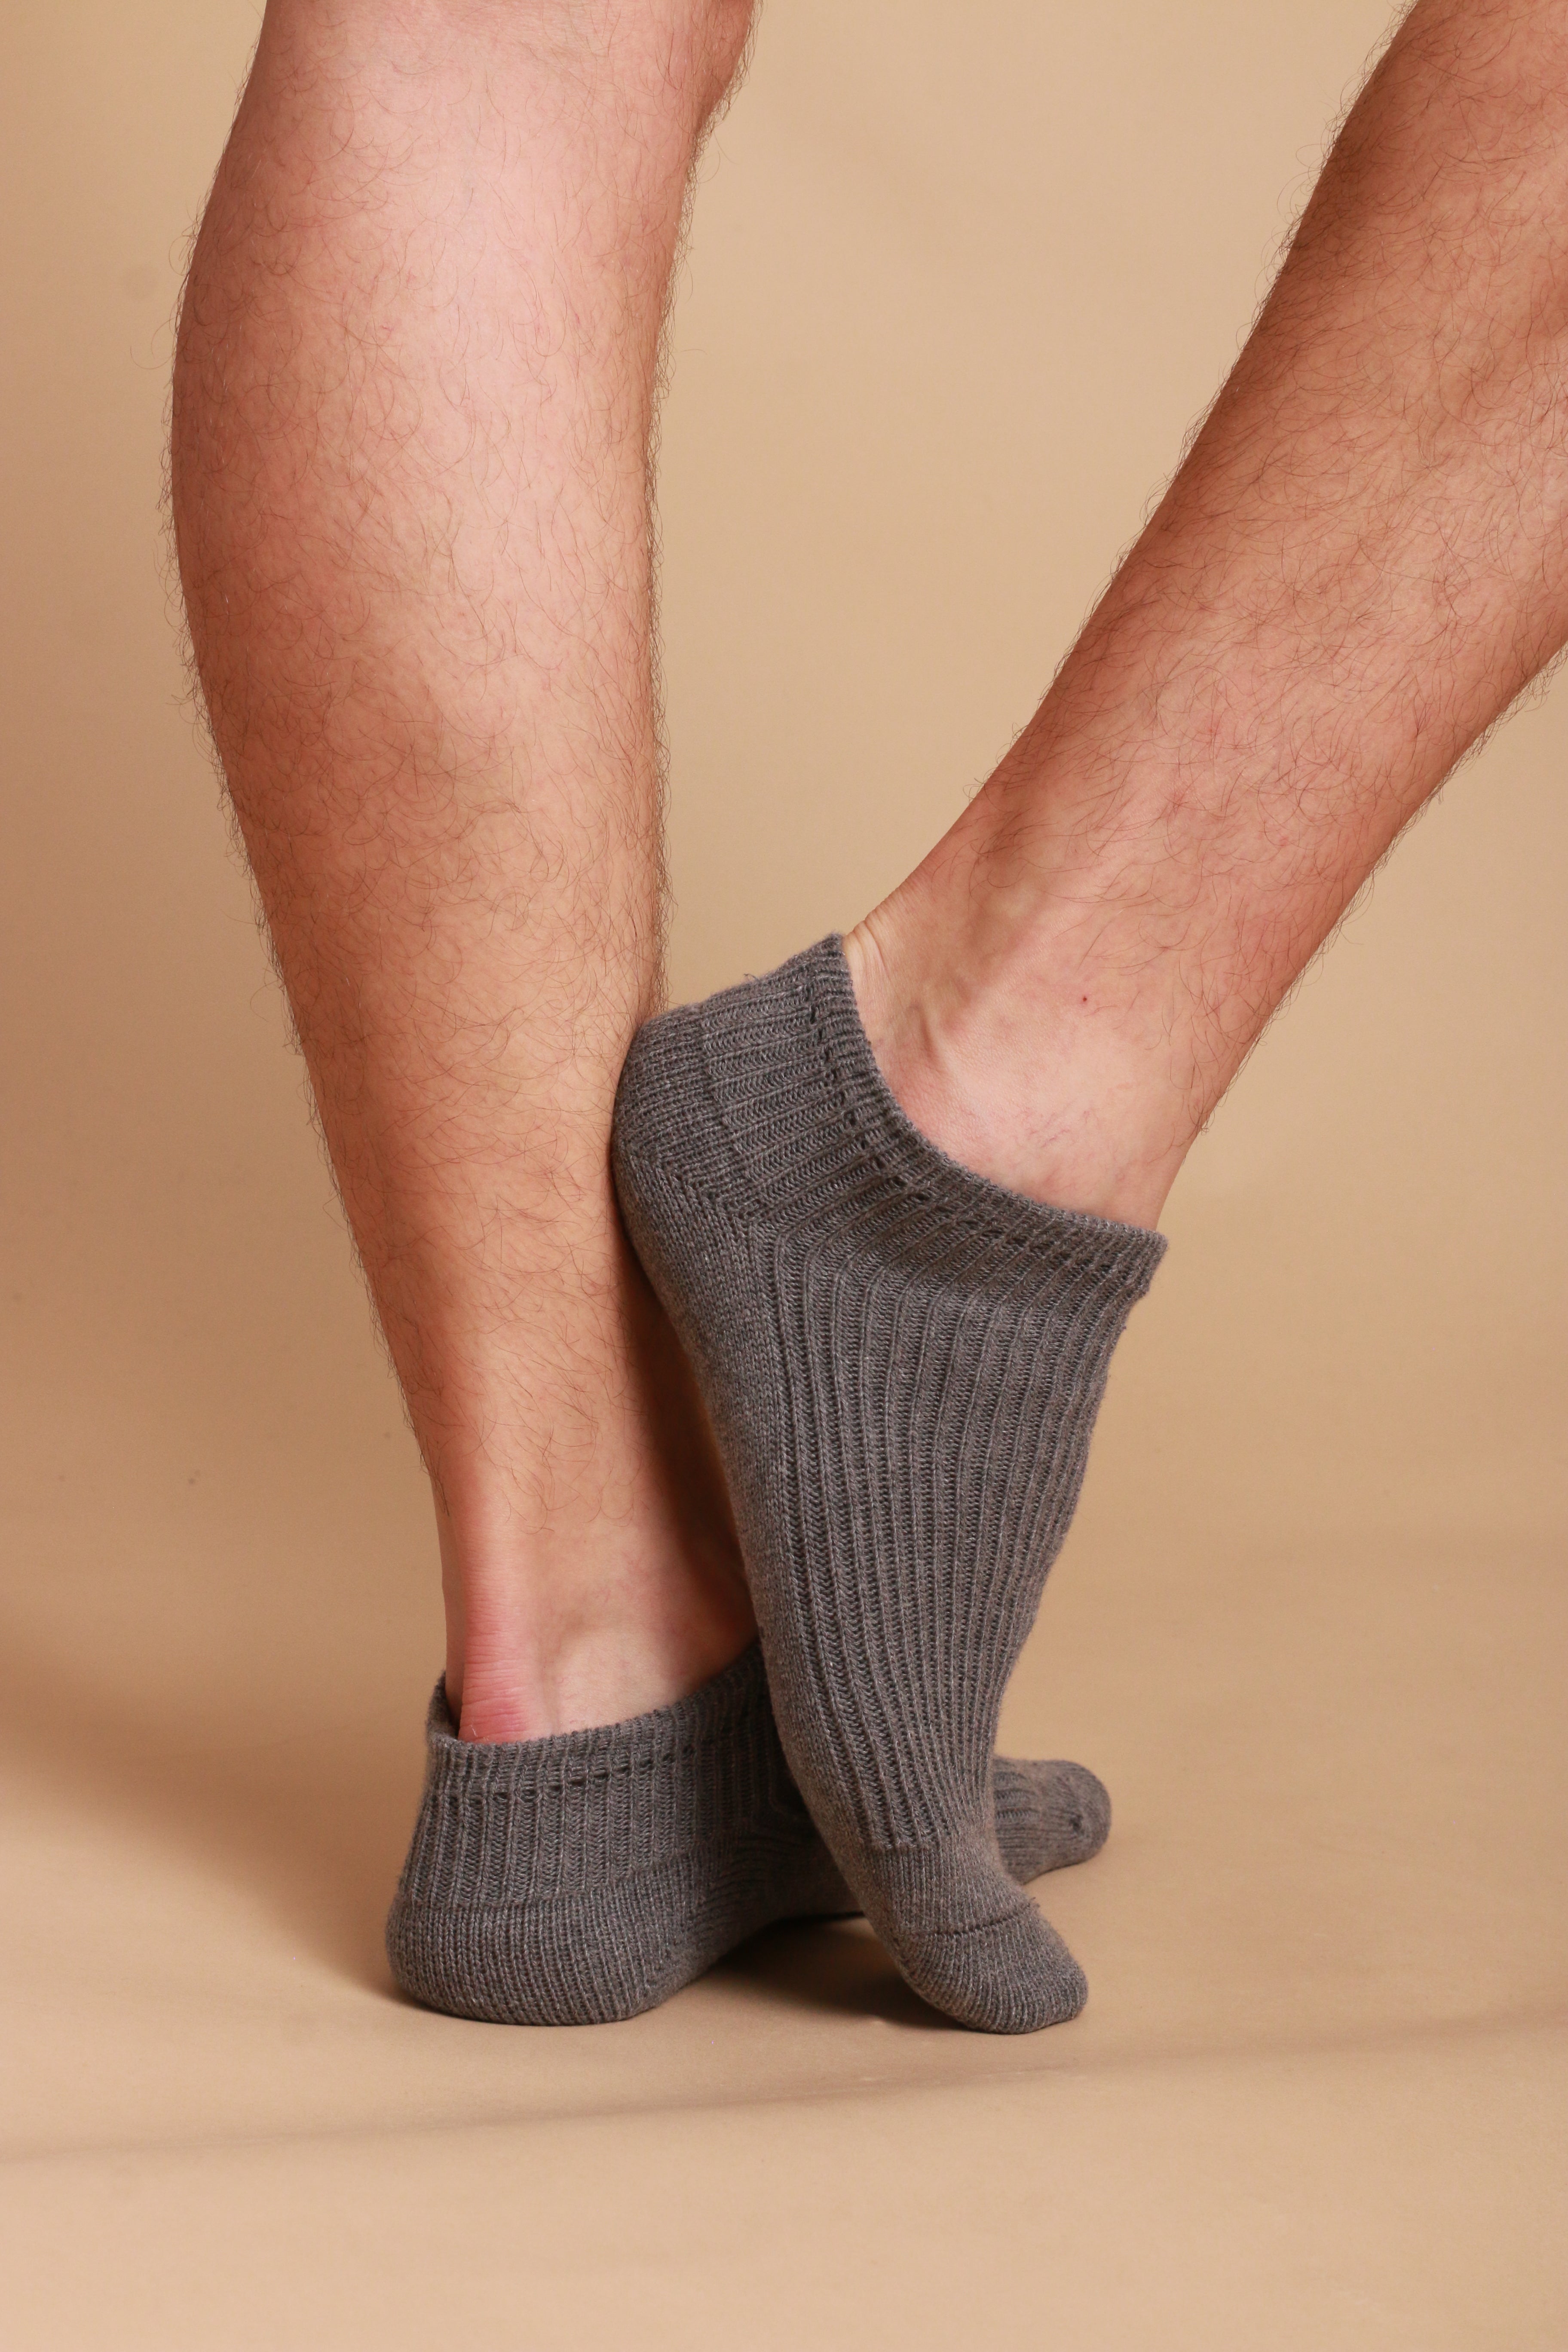 Latex-Free 100% Organic Cotton Ankle Socks (2pairs/Pack | Black) Size: 2XL | Color: Black